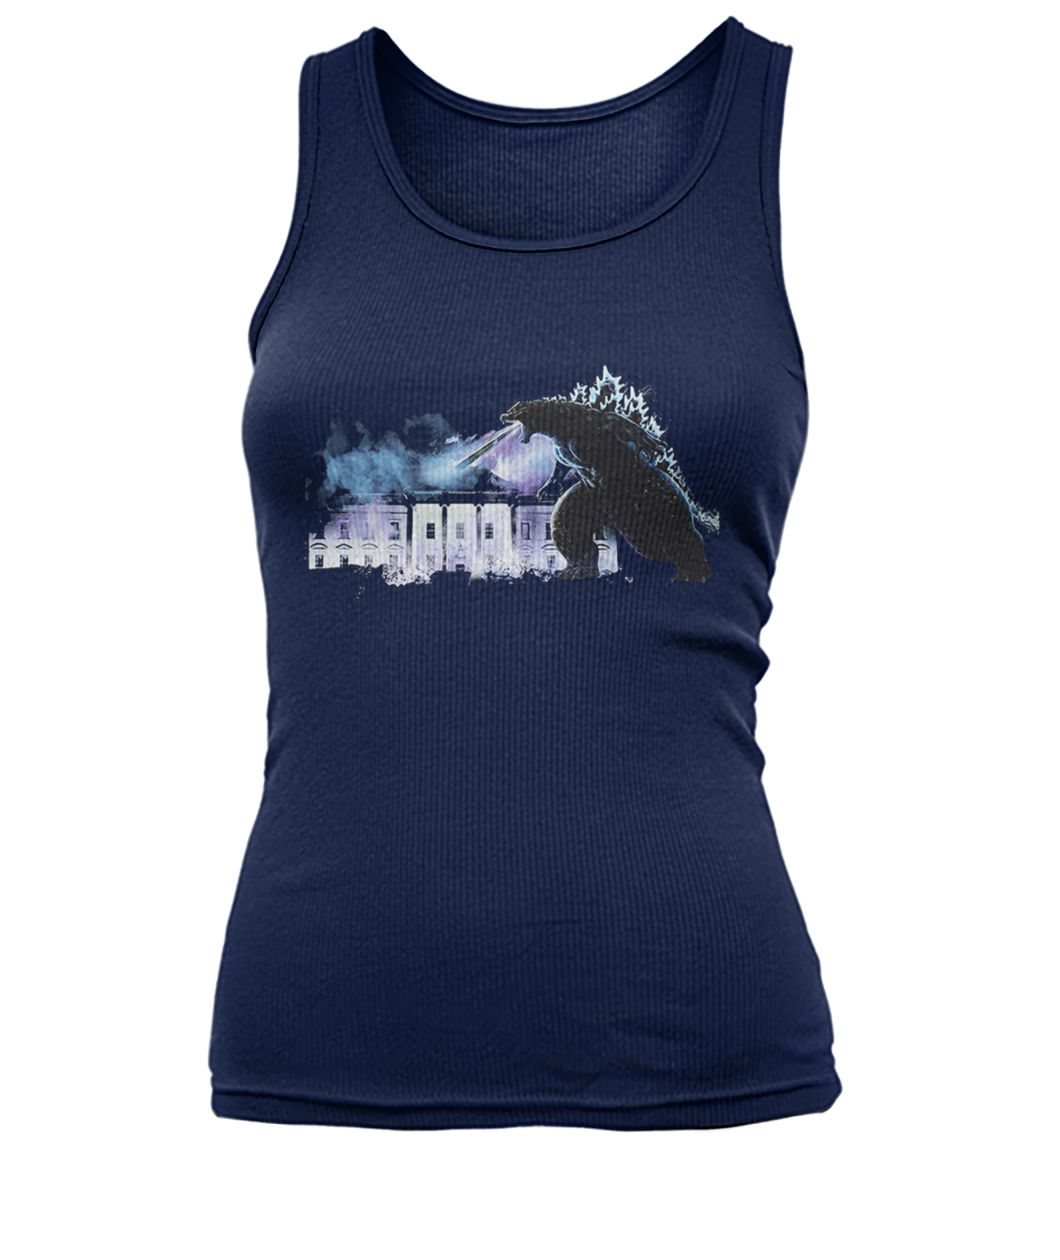 Godzilla atomic breath the white house king of the monsters women's tank top